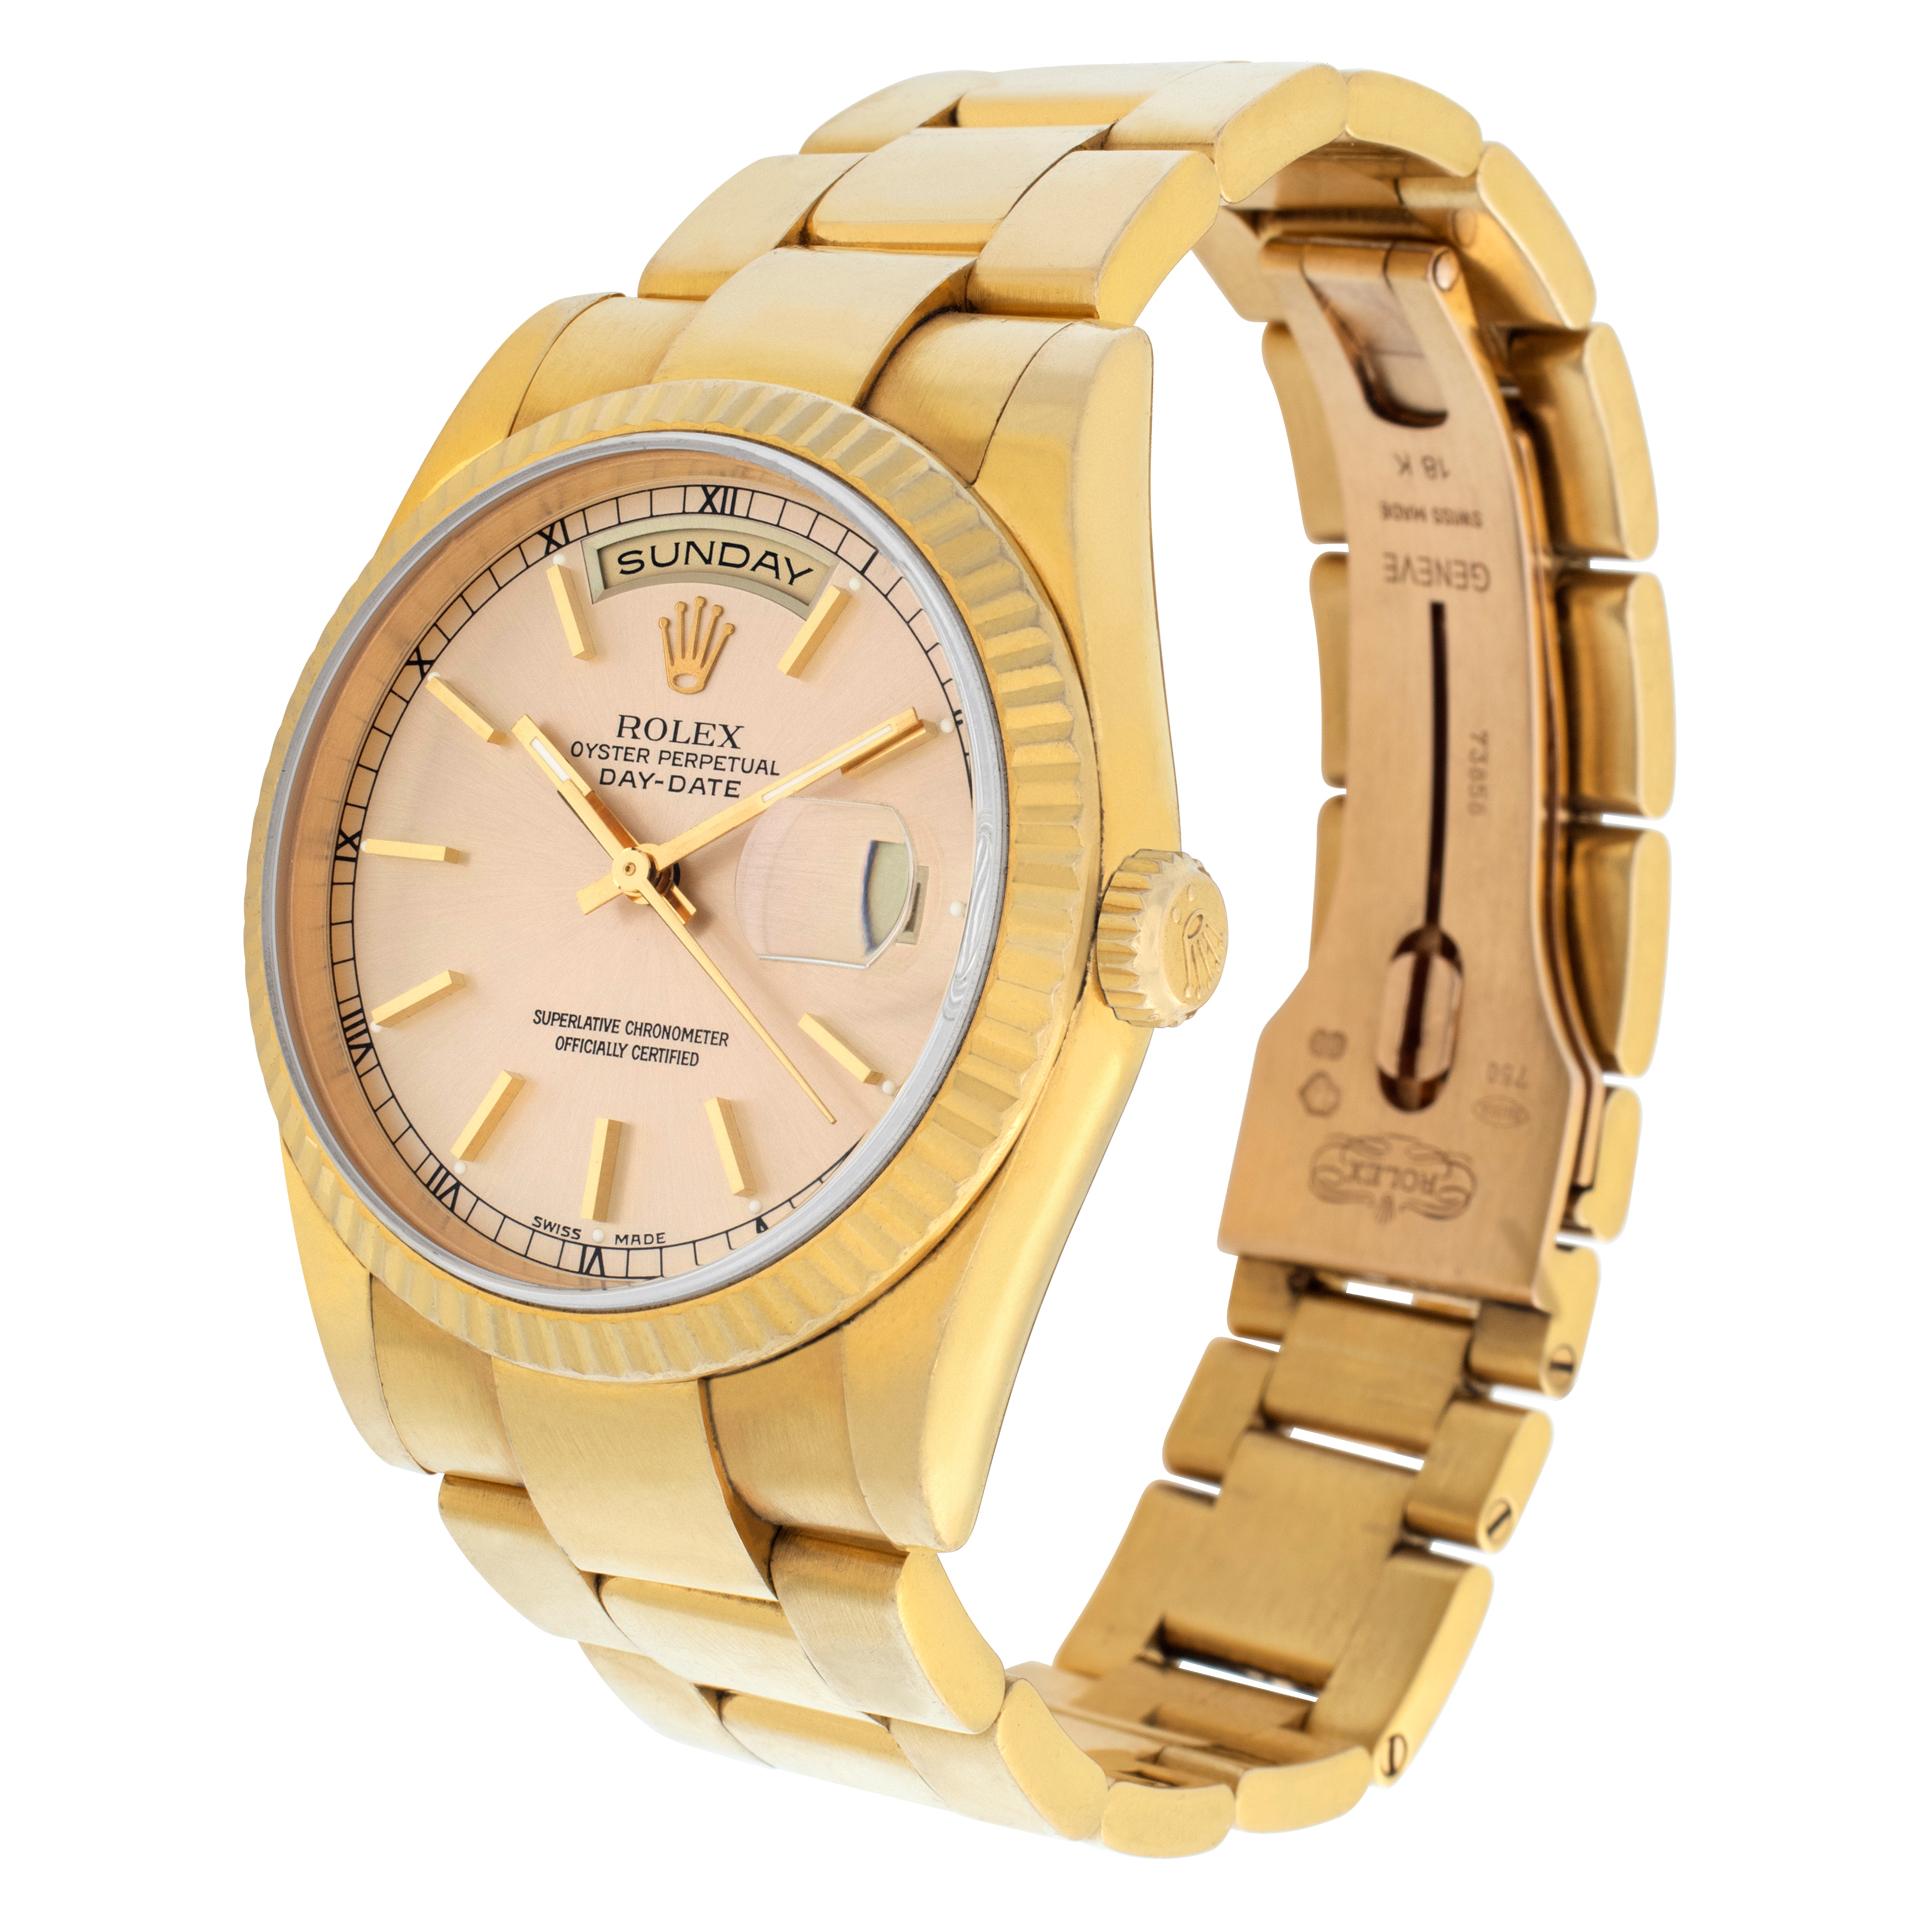 Rolex Day-Date in 18k. Auto, with sweep seconds, date and day. 36 mm case size. With box and papers. **Bank wire only at this price** Ref 118238. Circa 2003. Fine Pre-owned Rolex Watch. Certified preowned Dress Rolex Day-Date 118238 watch is made